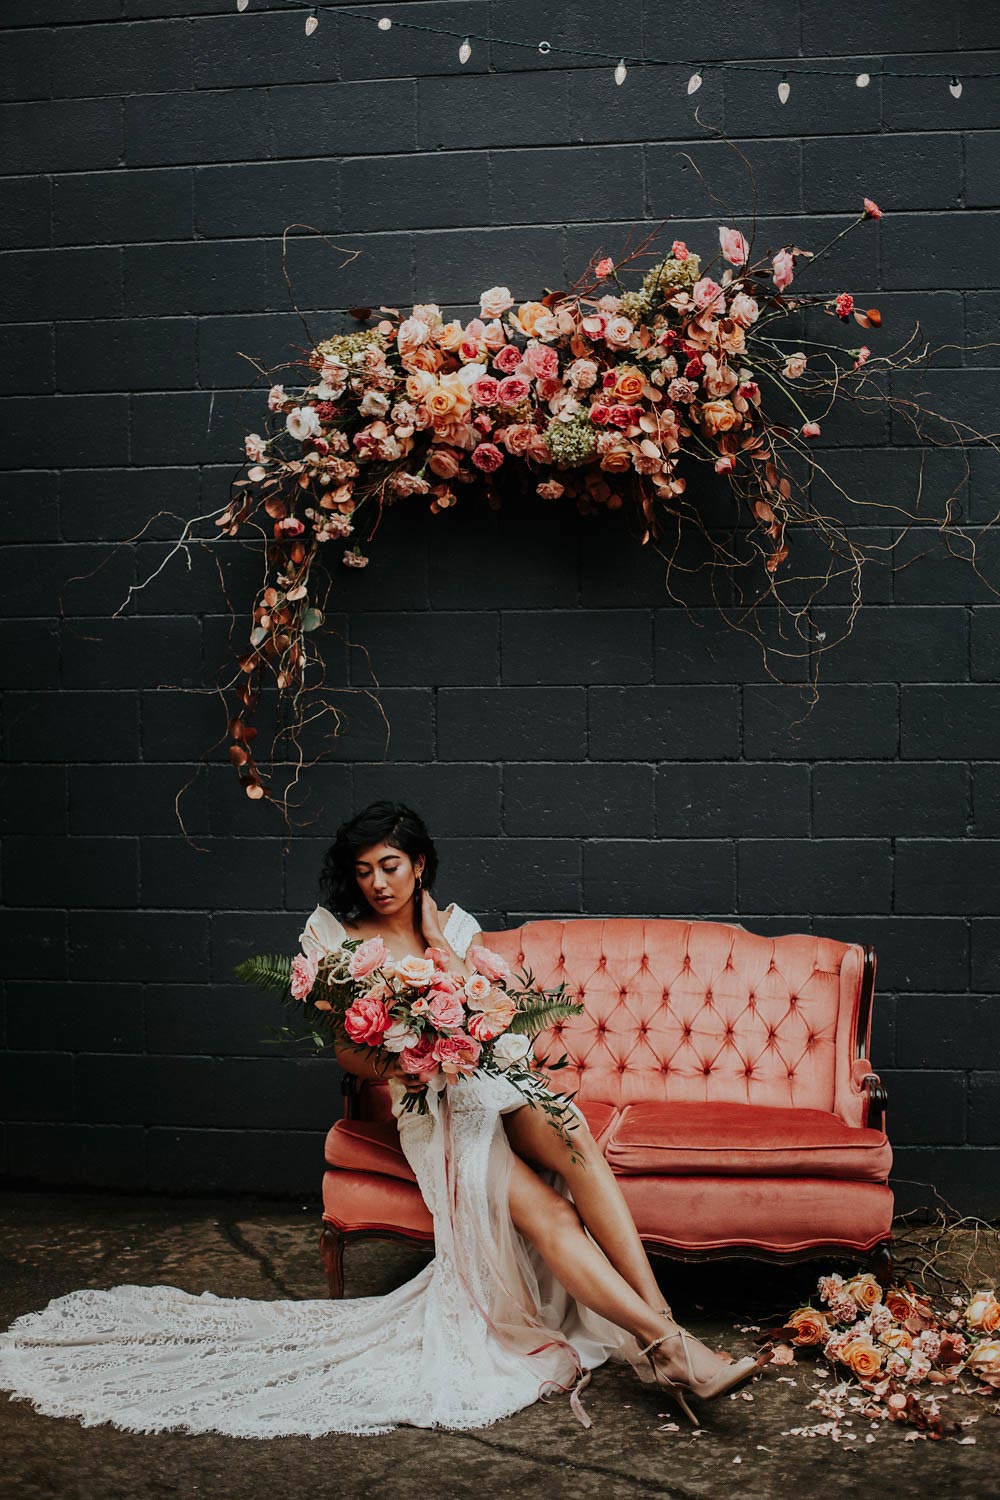 We Cannot Get Over This Edgy Bride’s Dusty Pink Wildflower Backdrop #floralinstallations #weddingceremonybackdrop #edgybridalstyle